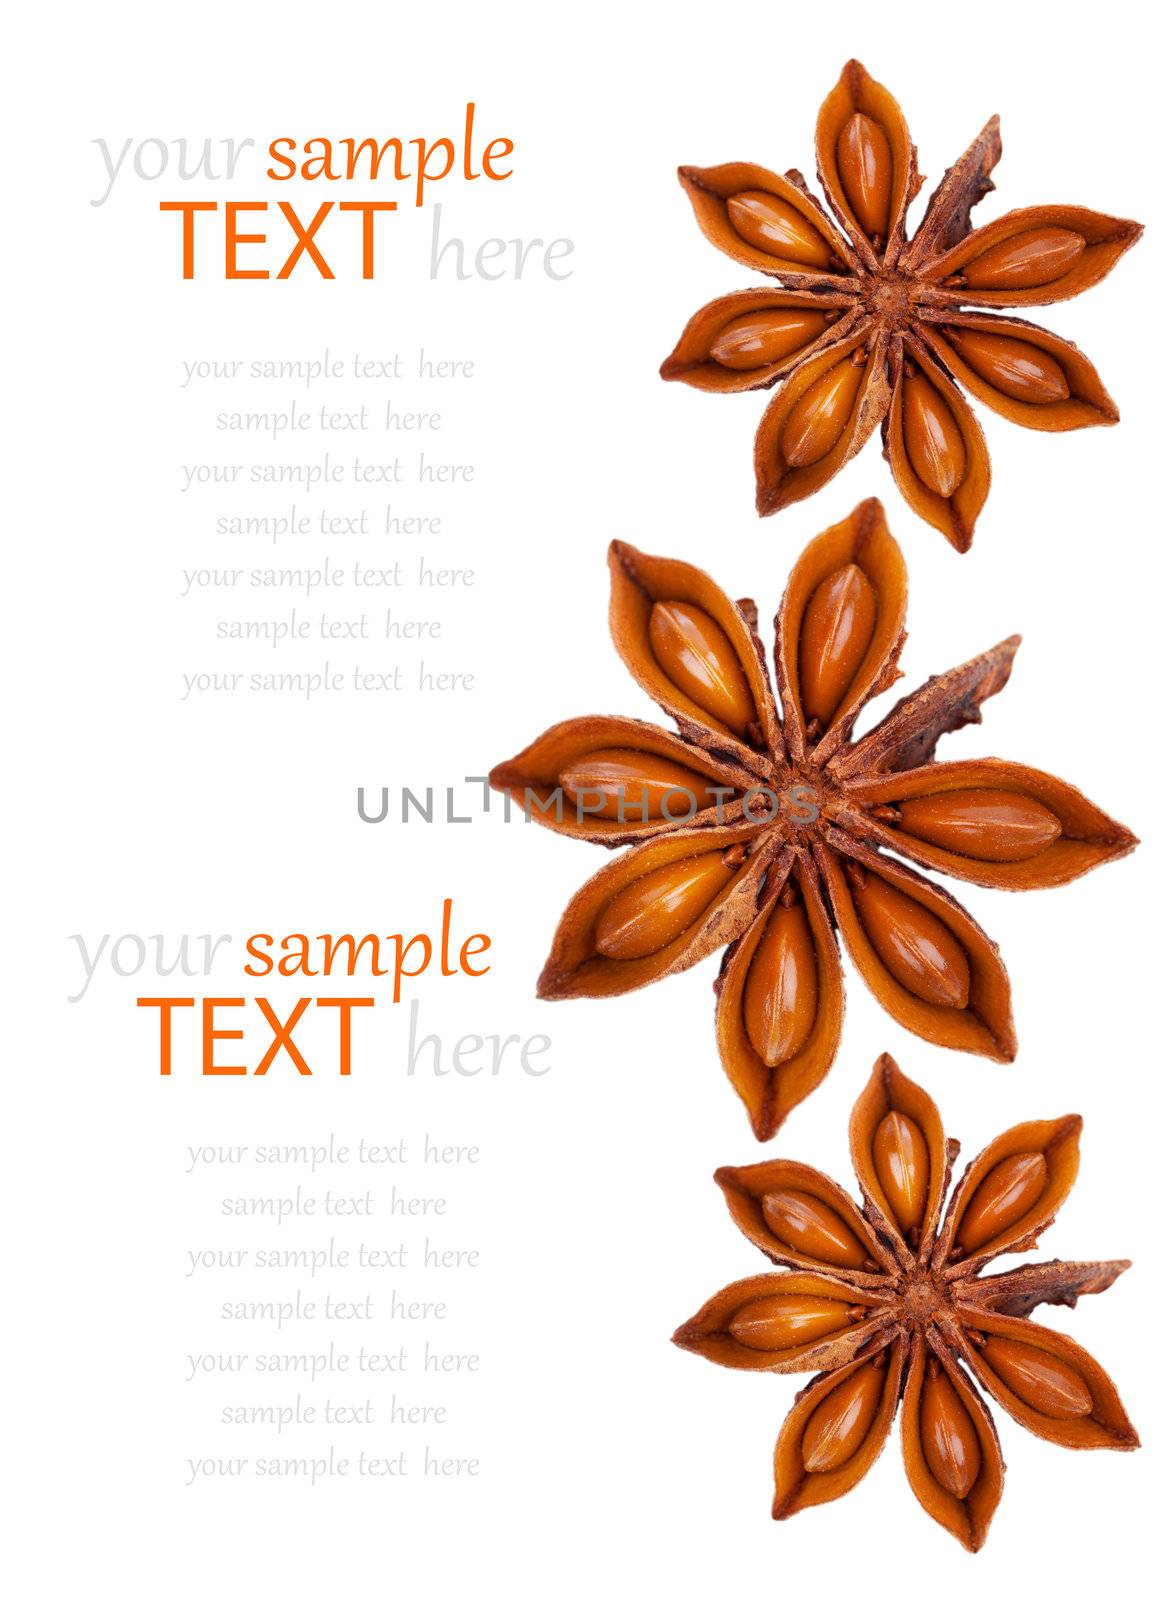 Whole Star Anise isolated on white background, with copy space